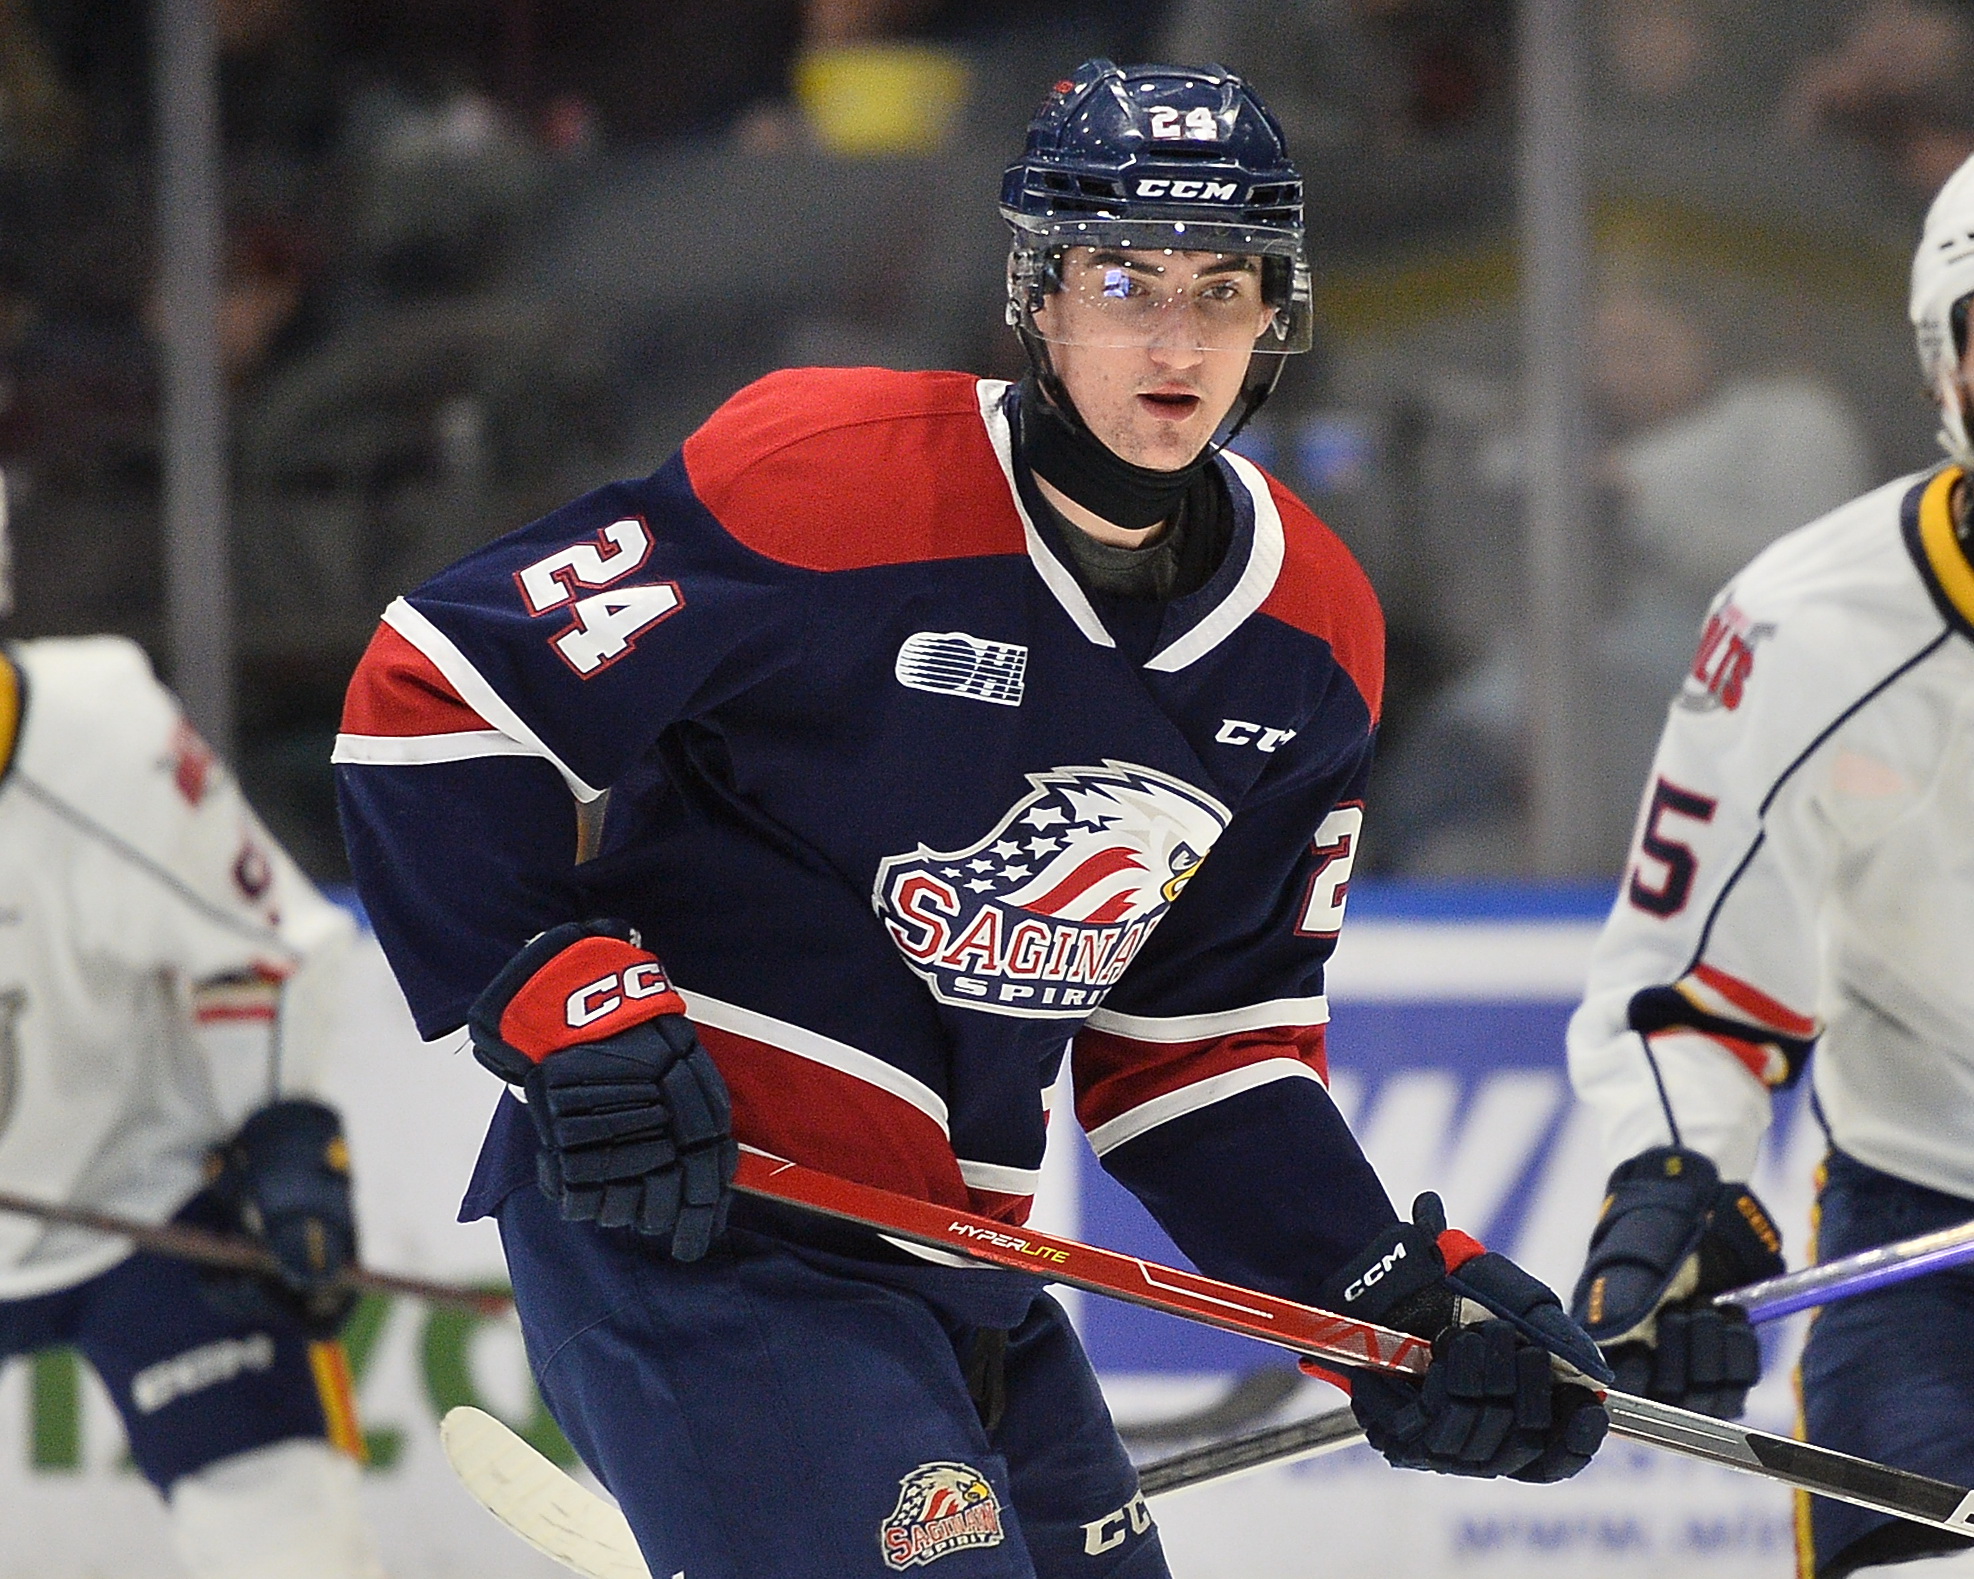 A day in the life of Saginaw Spirit's Cole Perfetti